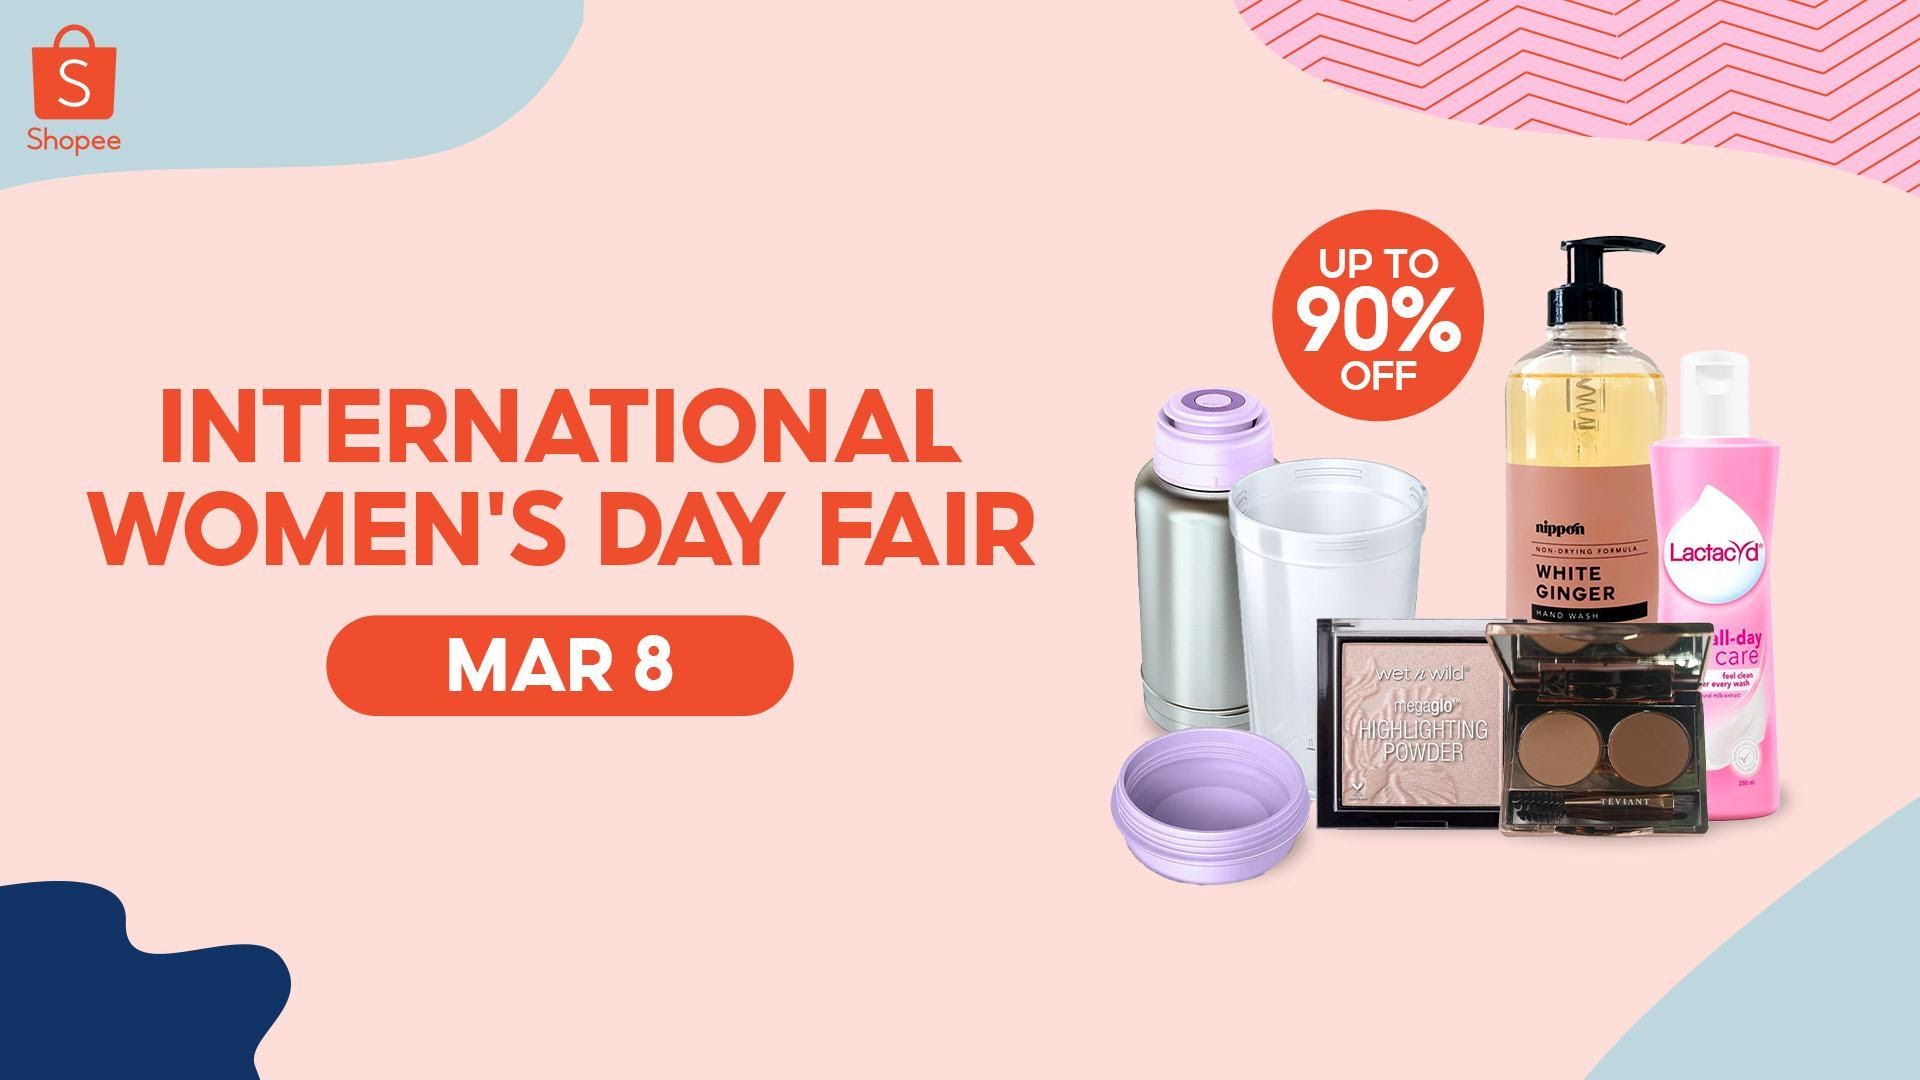 10 Finds for every kind of woman at the Shopee’s International Women’s Day Fair